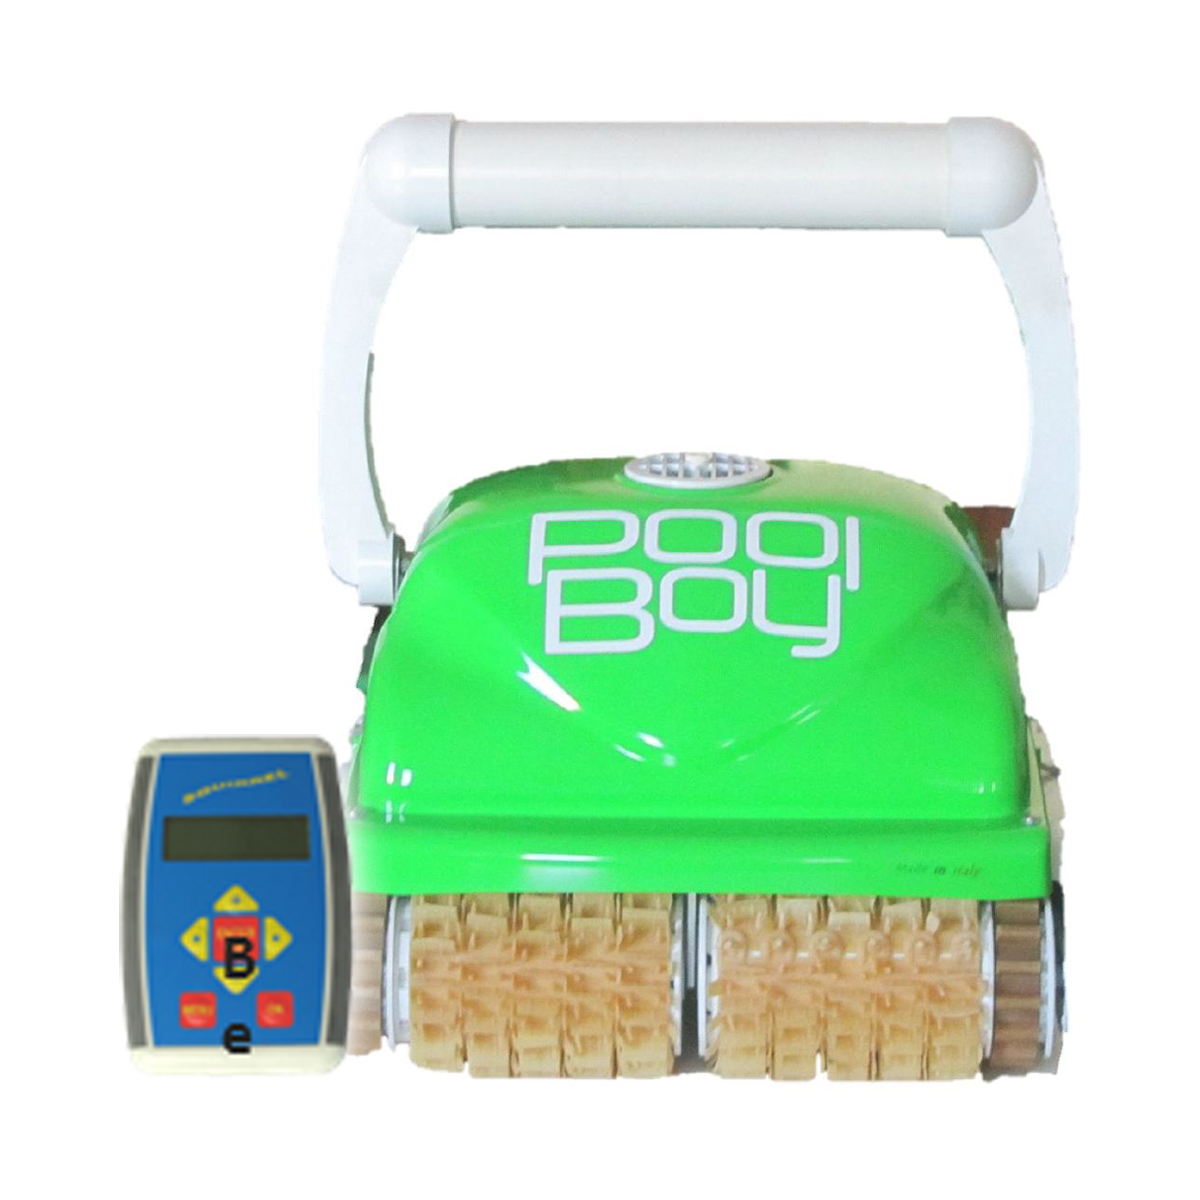 POOL BOY electric floor and wall vac for swimming ponds and natural pools up to 20x10 m, with remote unit, cable length 20m, 11m/min, 18 m3/h, filter 180 µ, 24 V, green POOL BOY electric floor and wall vac for swimming ponds and natural pools up to 20x10 m, with remote unit, cable length 20m, 11m/min, 18 m3/h, filter 180 µ, 24 V, green